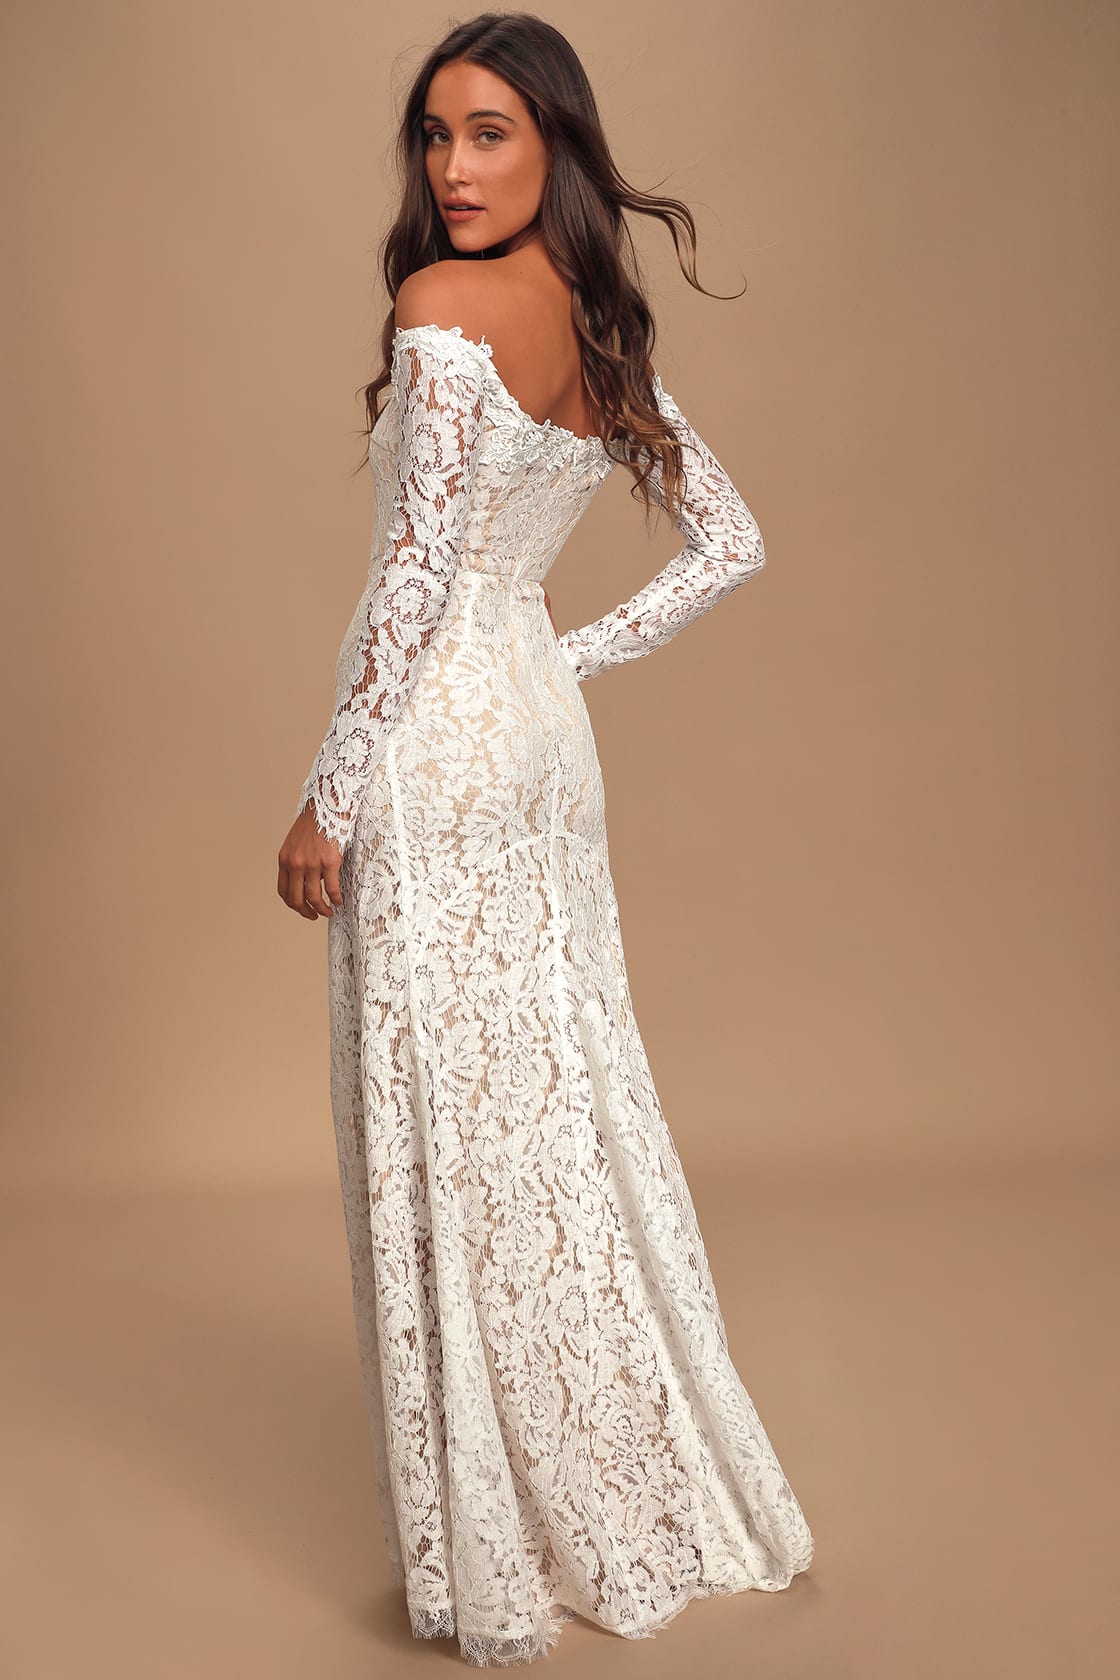 White Lace Off-the-Shoulder Casual Wedding Dress